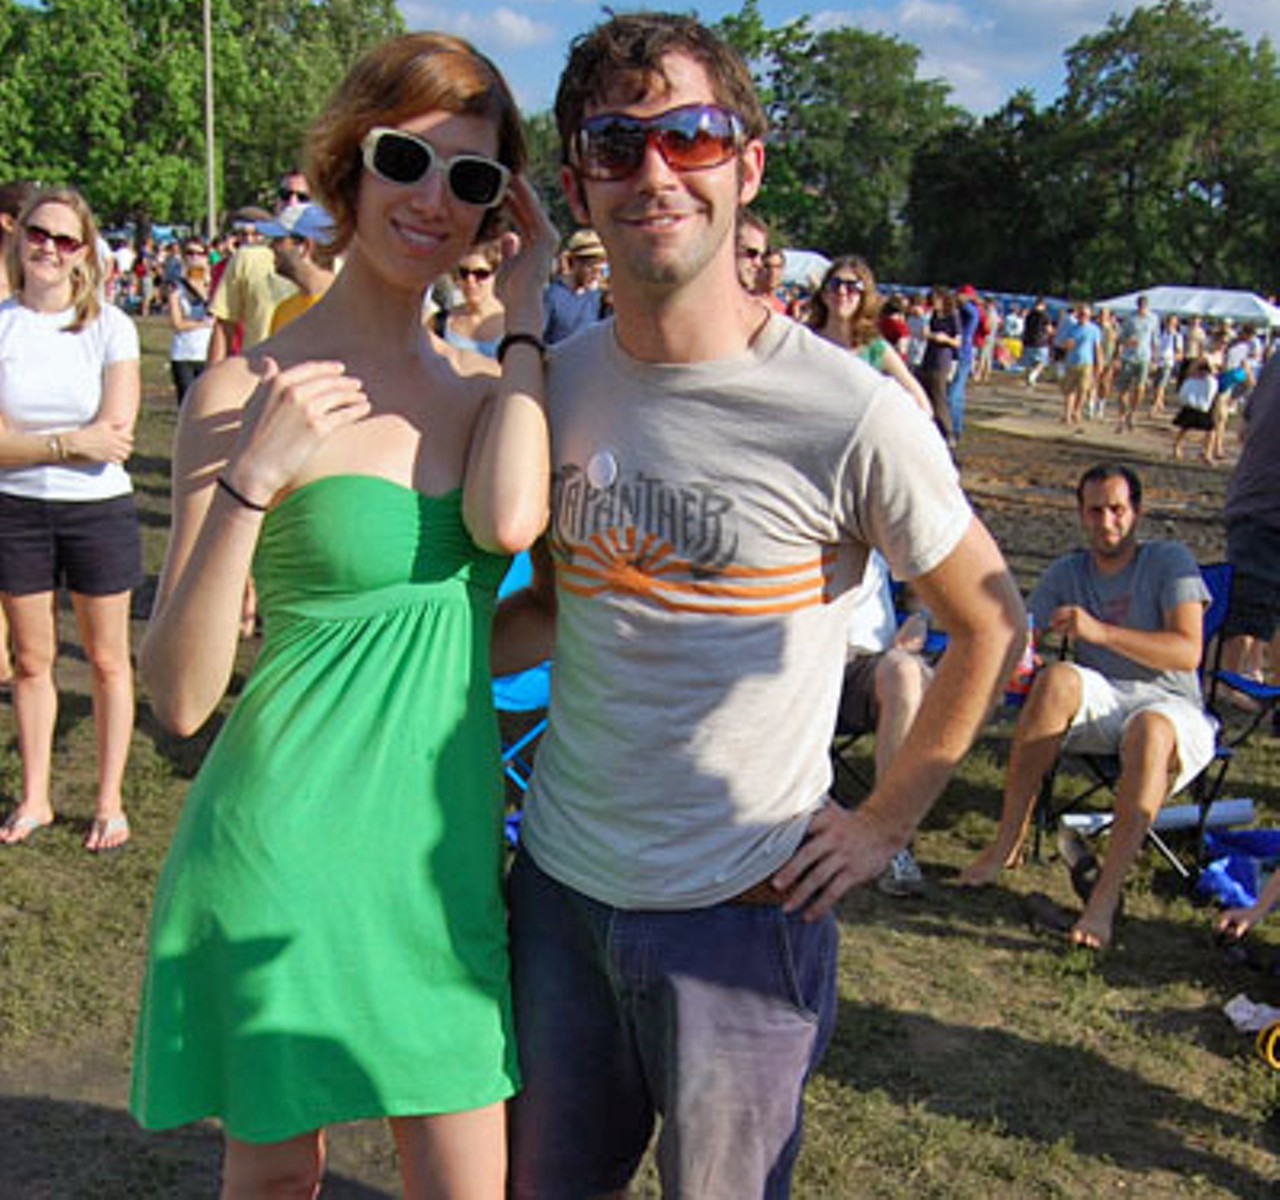 The monogamous couple at Pitchfork Music Festival was a common sight.
Click here for set reviews and  more photos from Pitchfork '08.